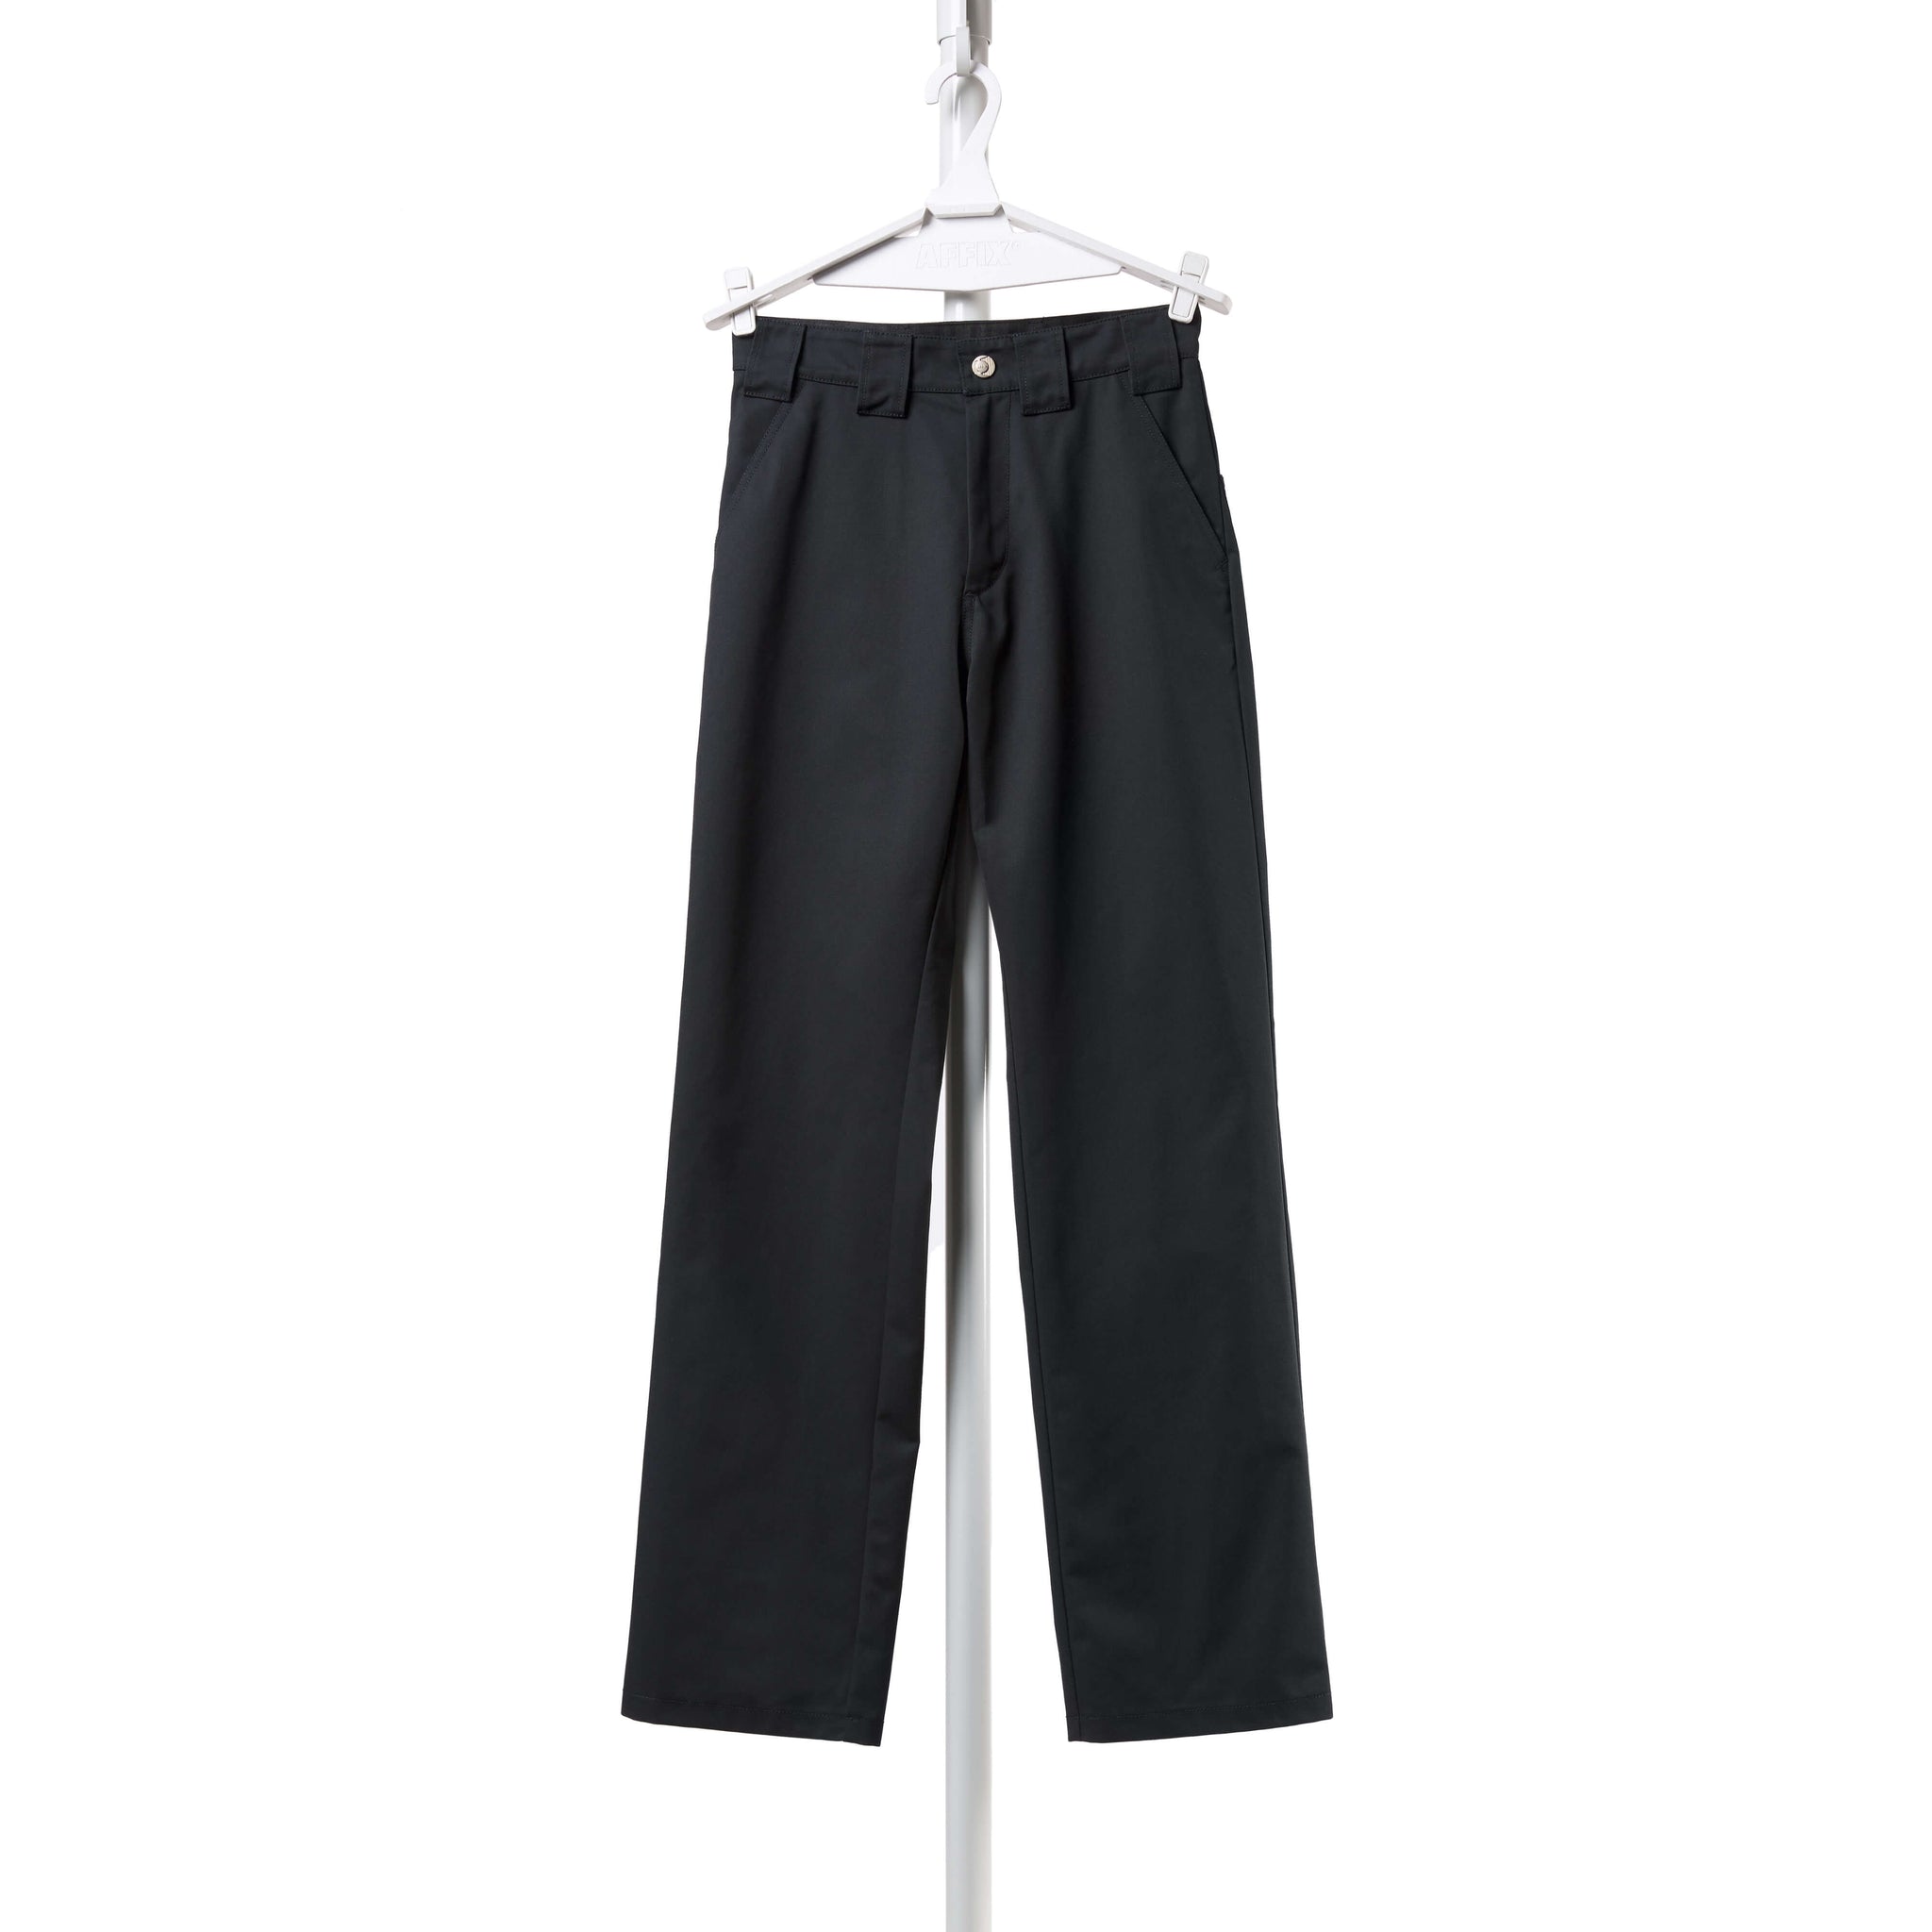 AFFIX WORKS Trousers